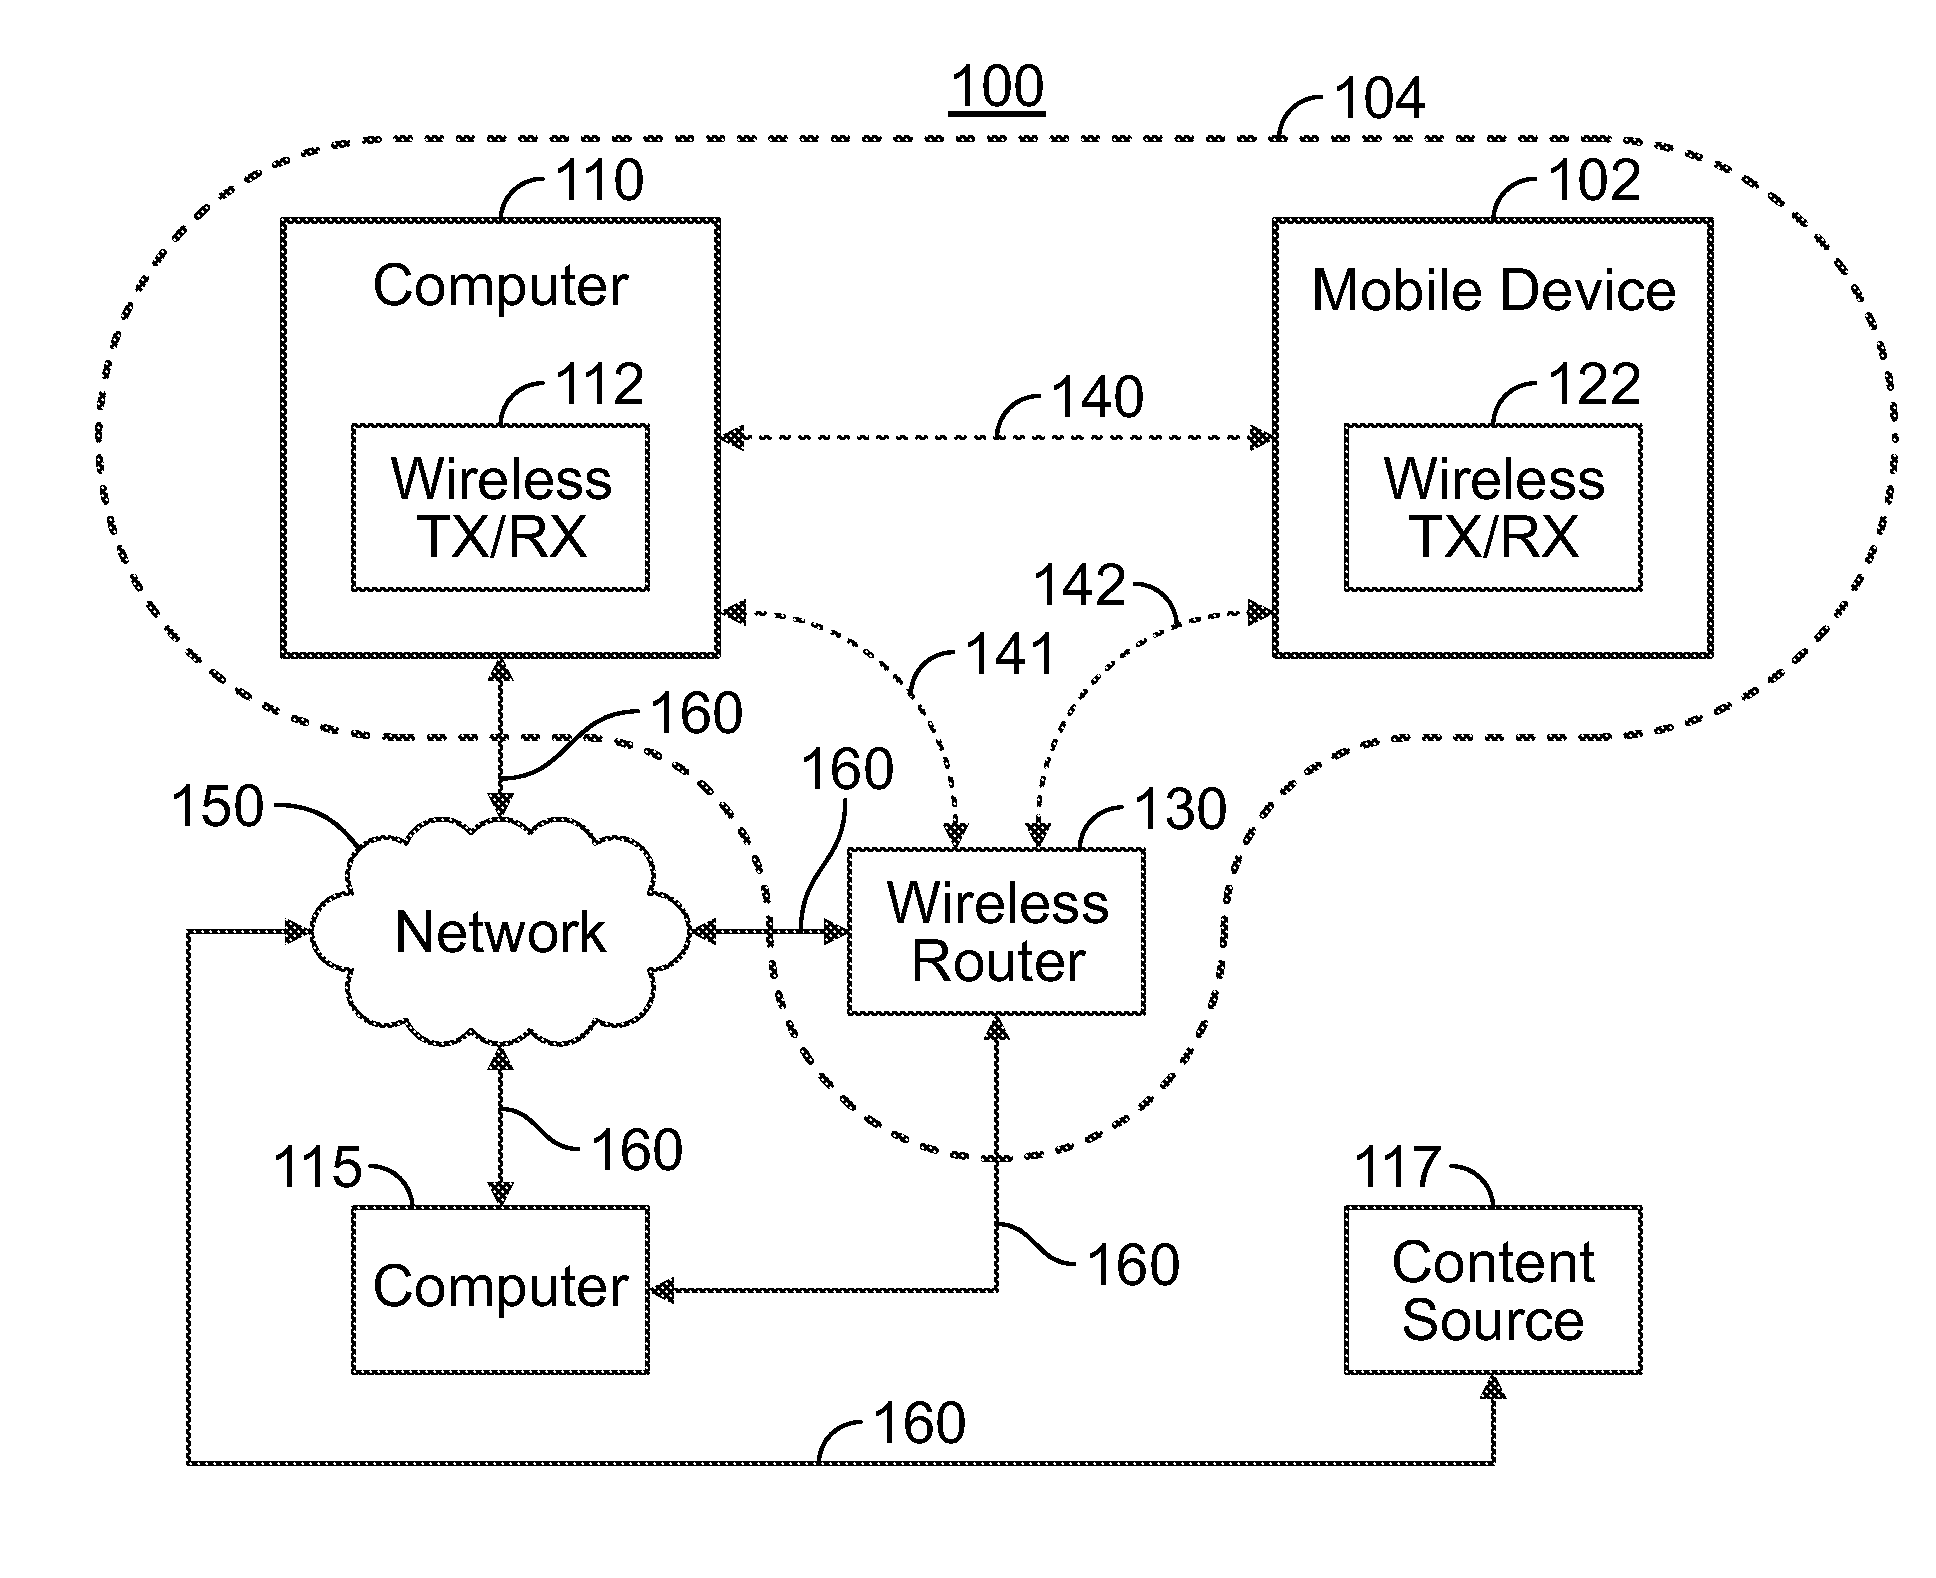 Method and Systems for Placing Physical Boundaries on Information Access/Storage, Transmission and Computation of Mobile Devices